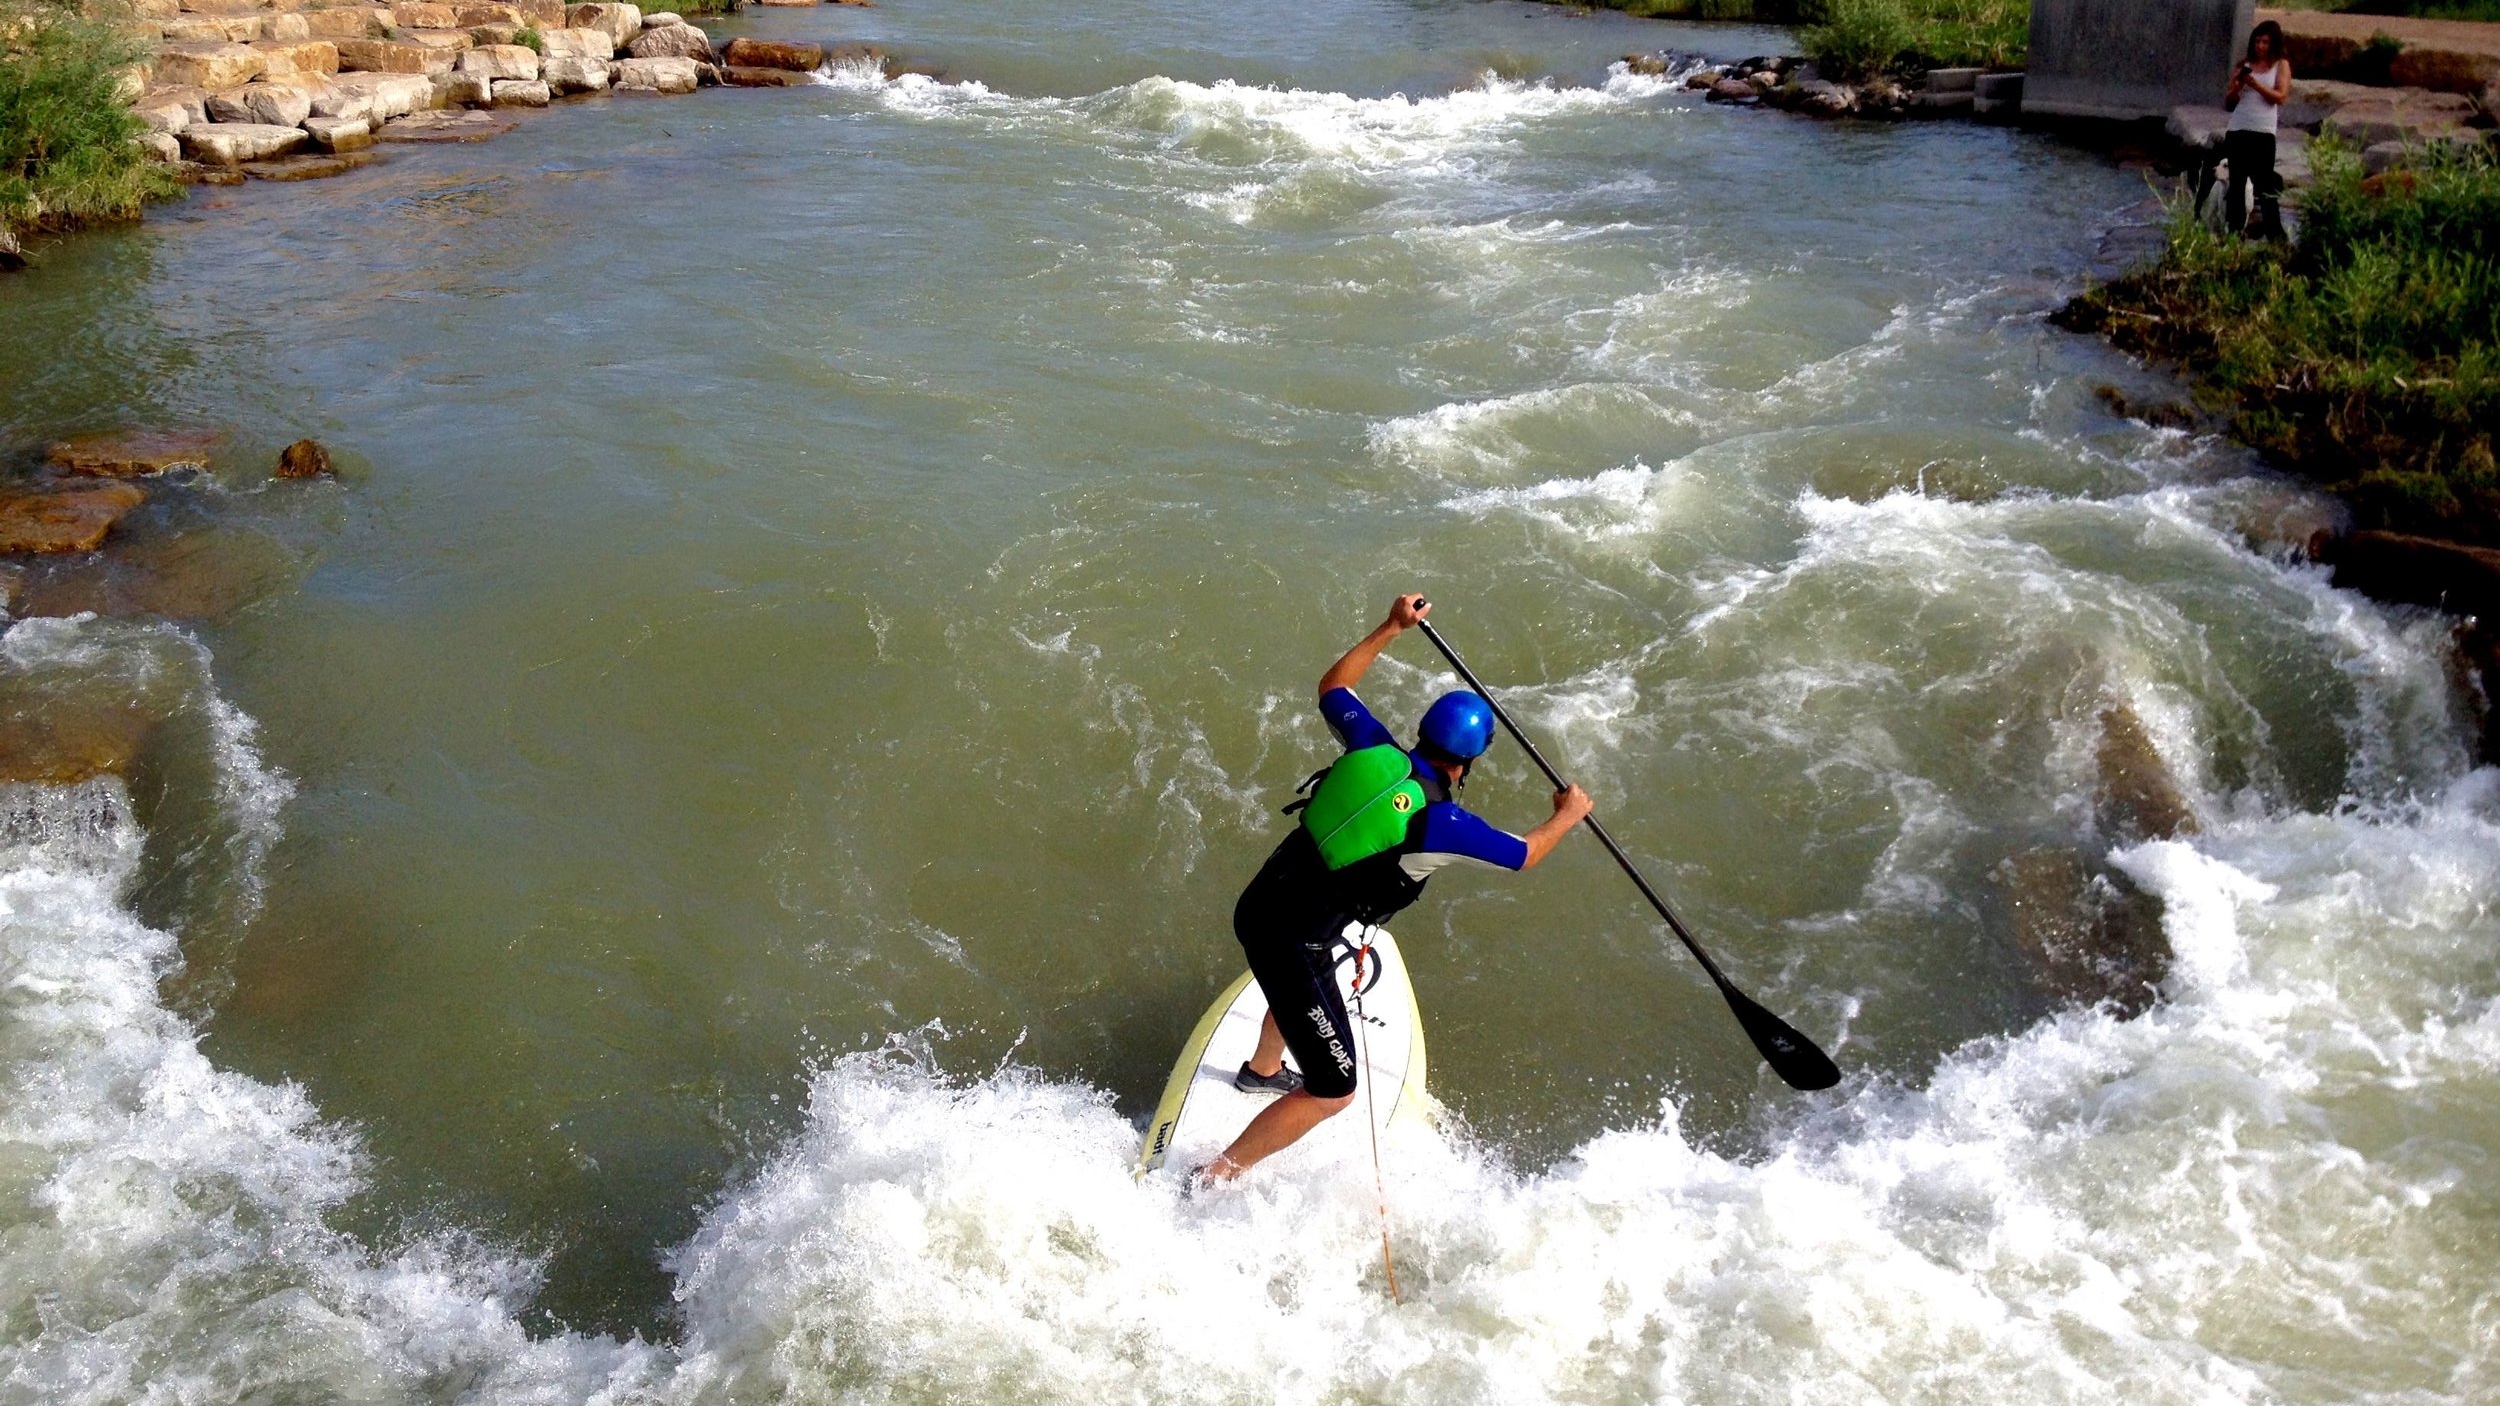 SUP surfing Montrose Colorado Watersports Park at Riverbottom Park